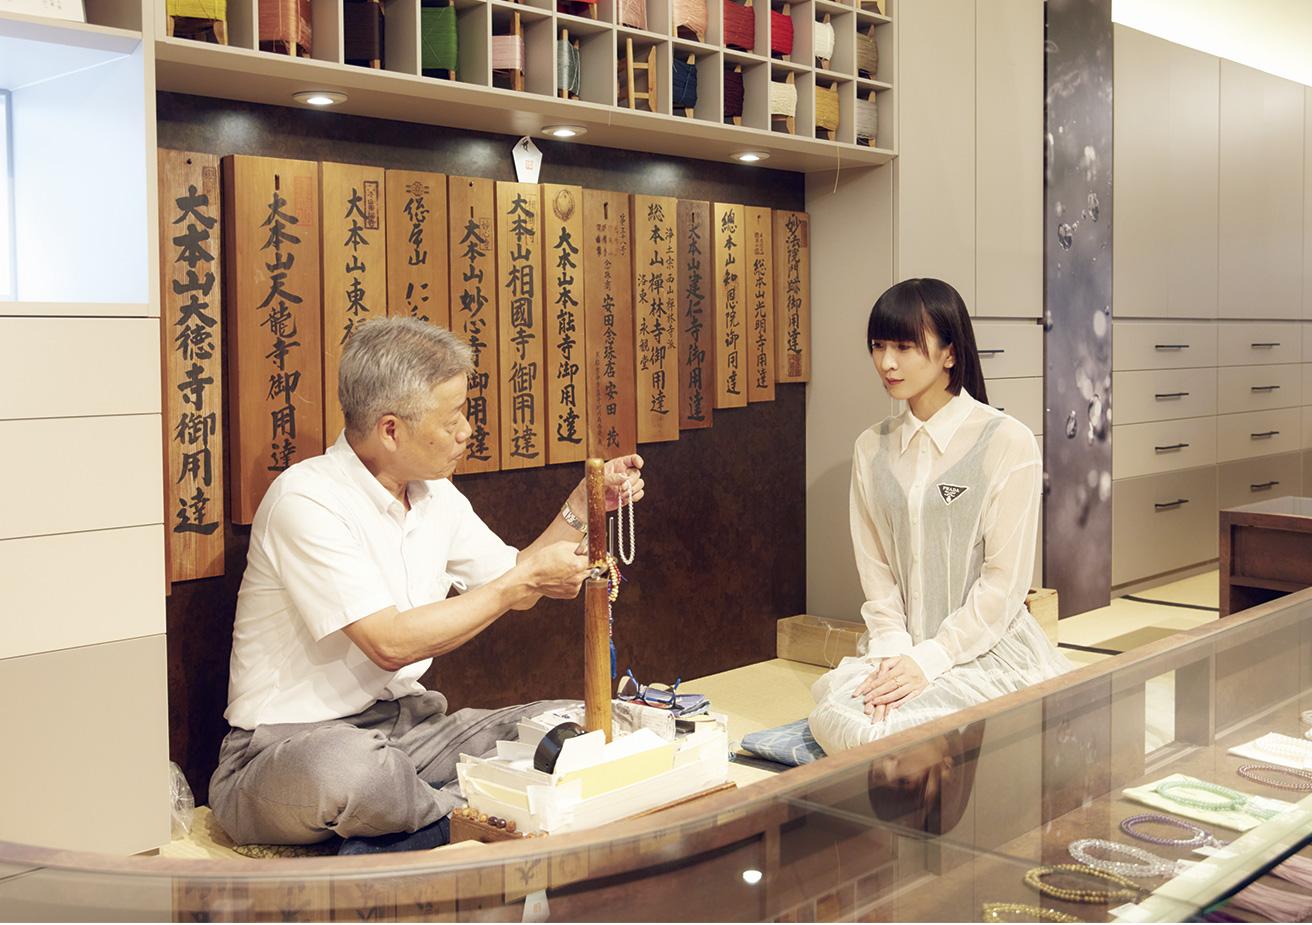 Yasuda Nenju Ten, established 1683 in Rokkaku, Teramachi, Kyoto. Gazing at the prayer beads made of white pearls with white silk thread, KASHIYUKA says, “this reminds me of the pink tassels on the prayer beads I had when I was a child.”